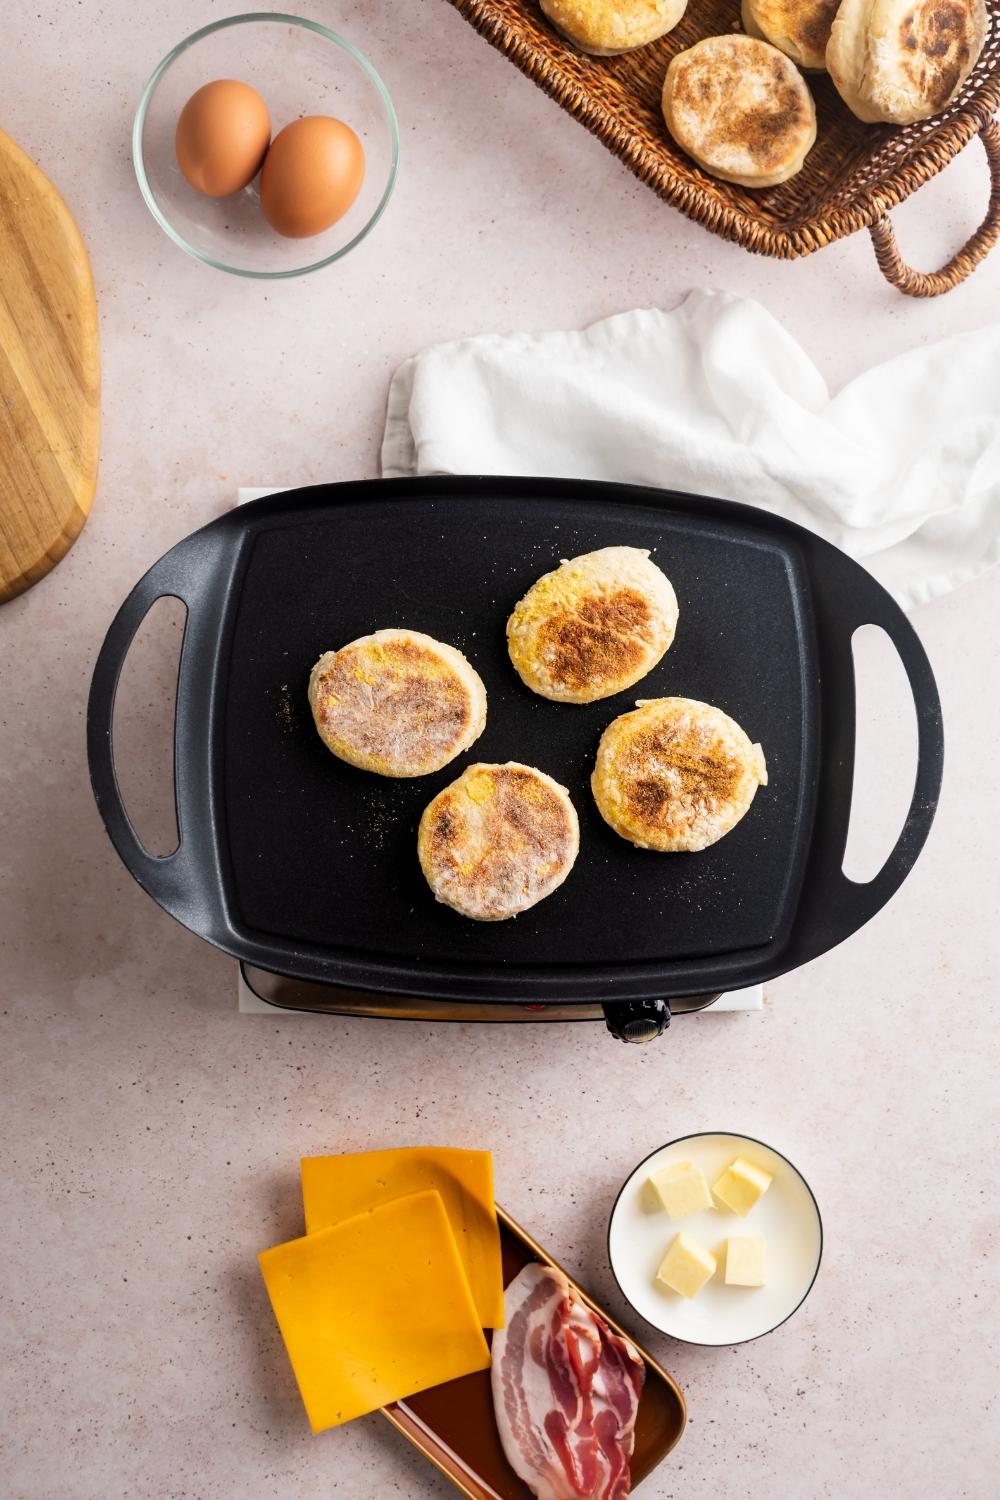 Two english muffins face down on a griddle. Surrounding it is two eggs in a bowl, part of a basket with english muffins, and a bowl with two slices of American cheese all on a white counter.